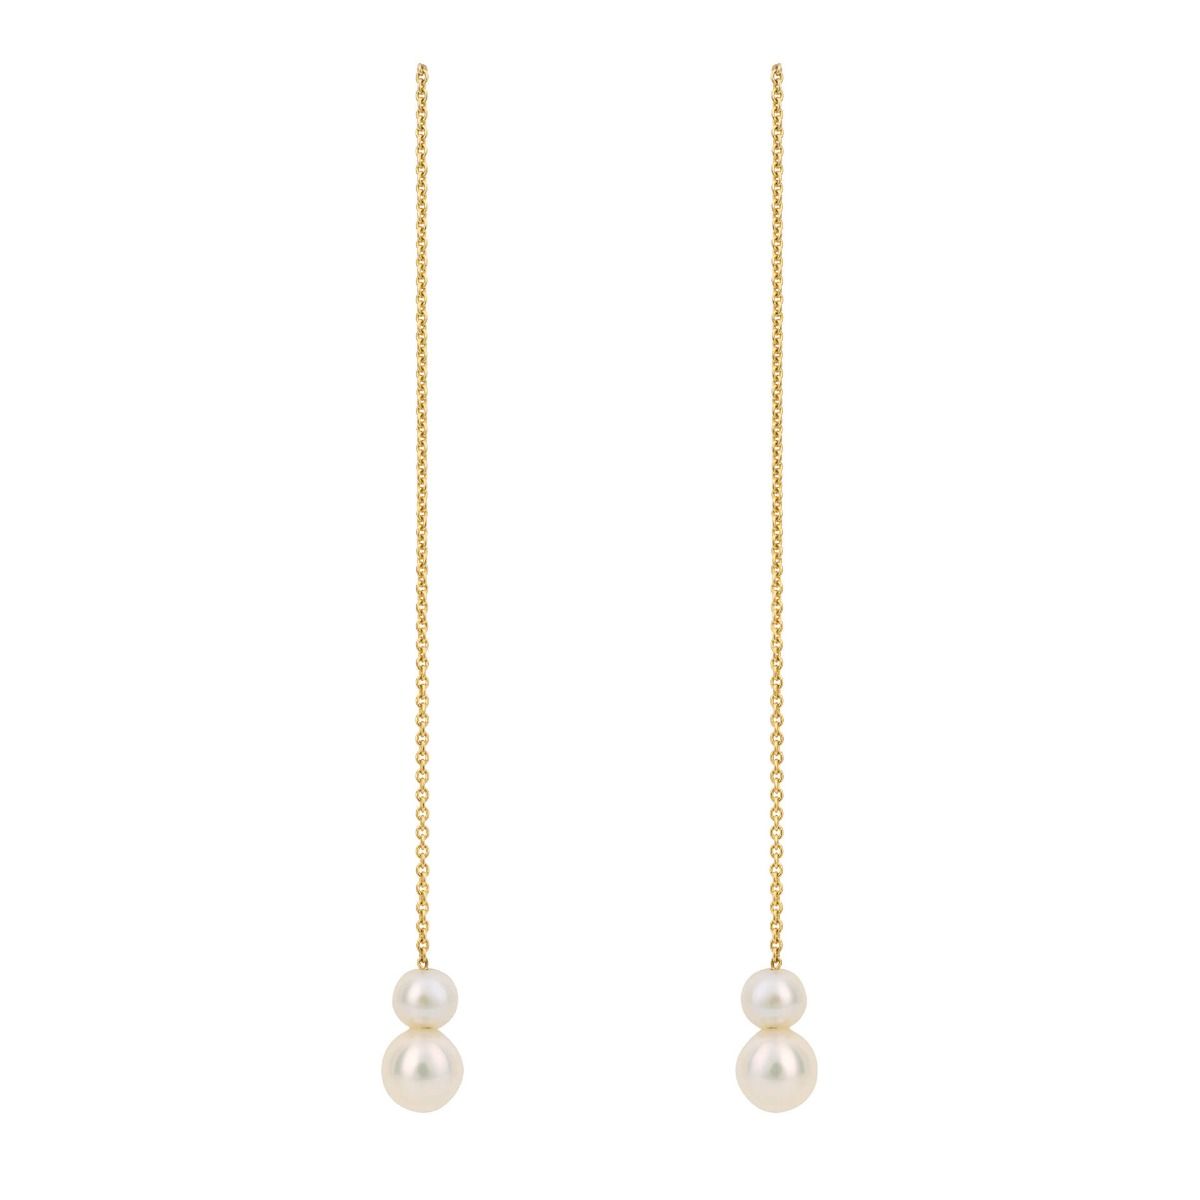 Freshwater Pearl & 9ct Gold Pull Through Earrings